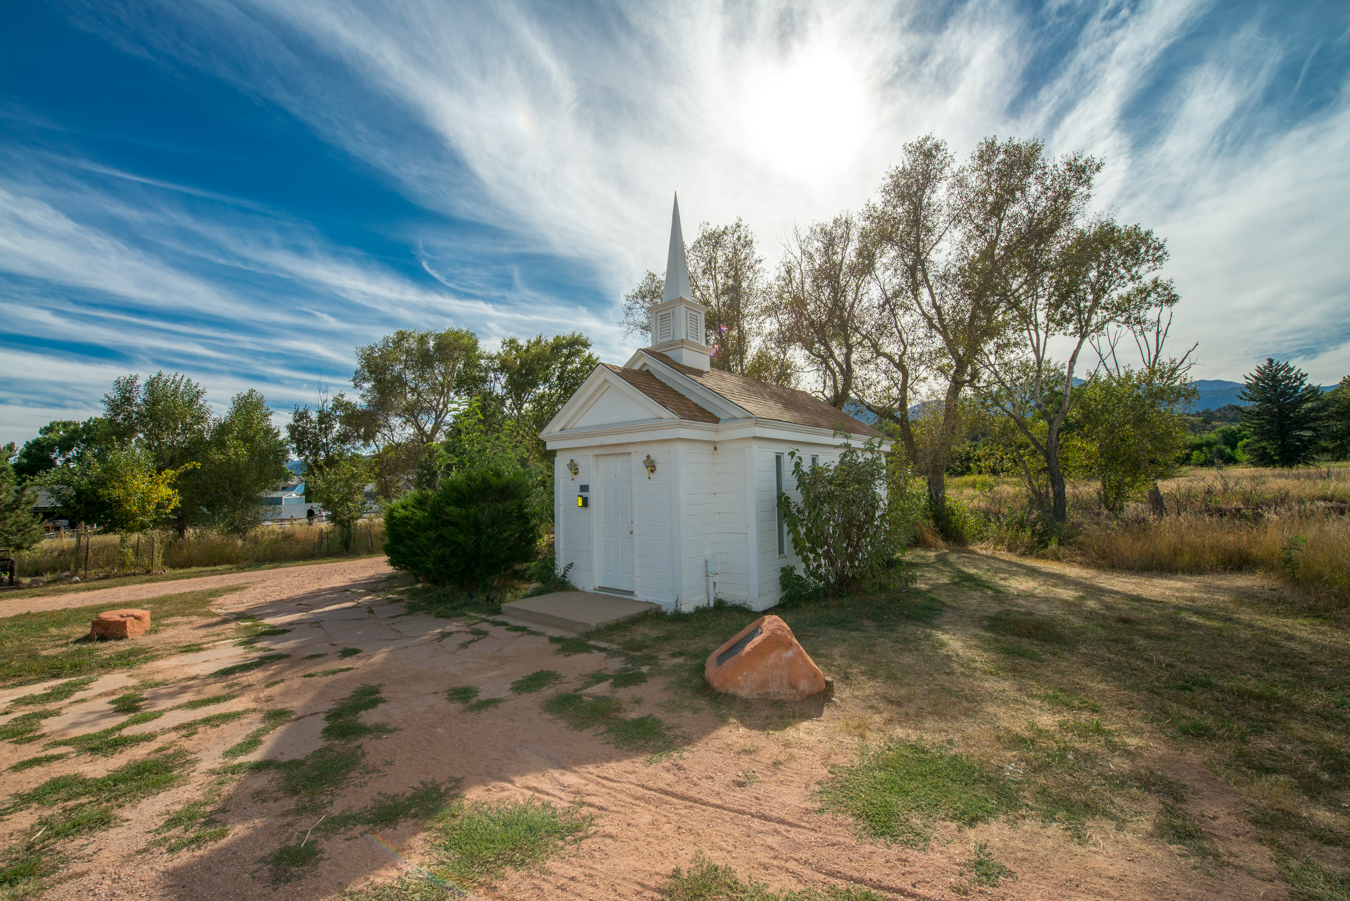 American Mother's Chapel Wedding Chapel Blue Sky and Wispy Clouds